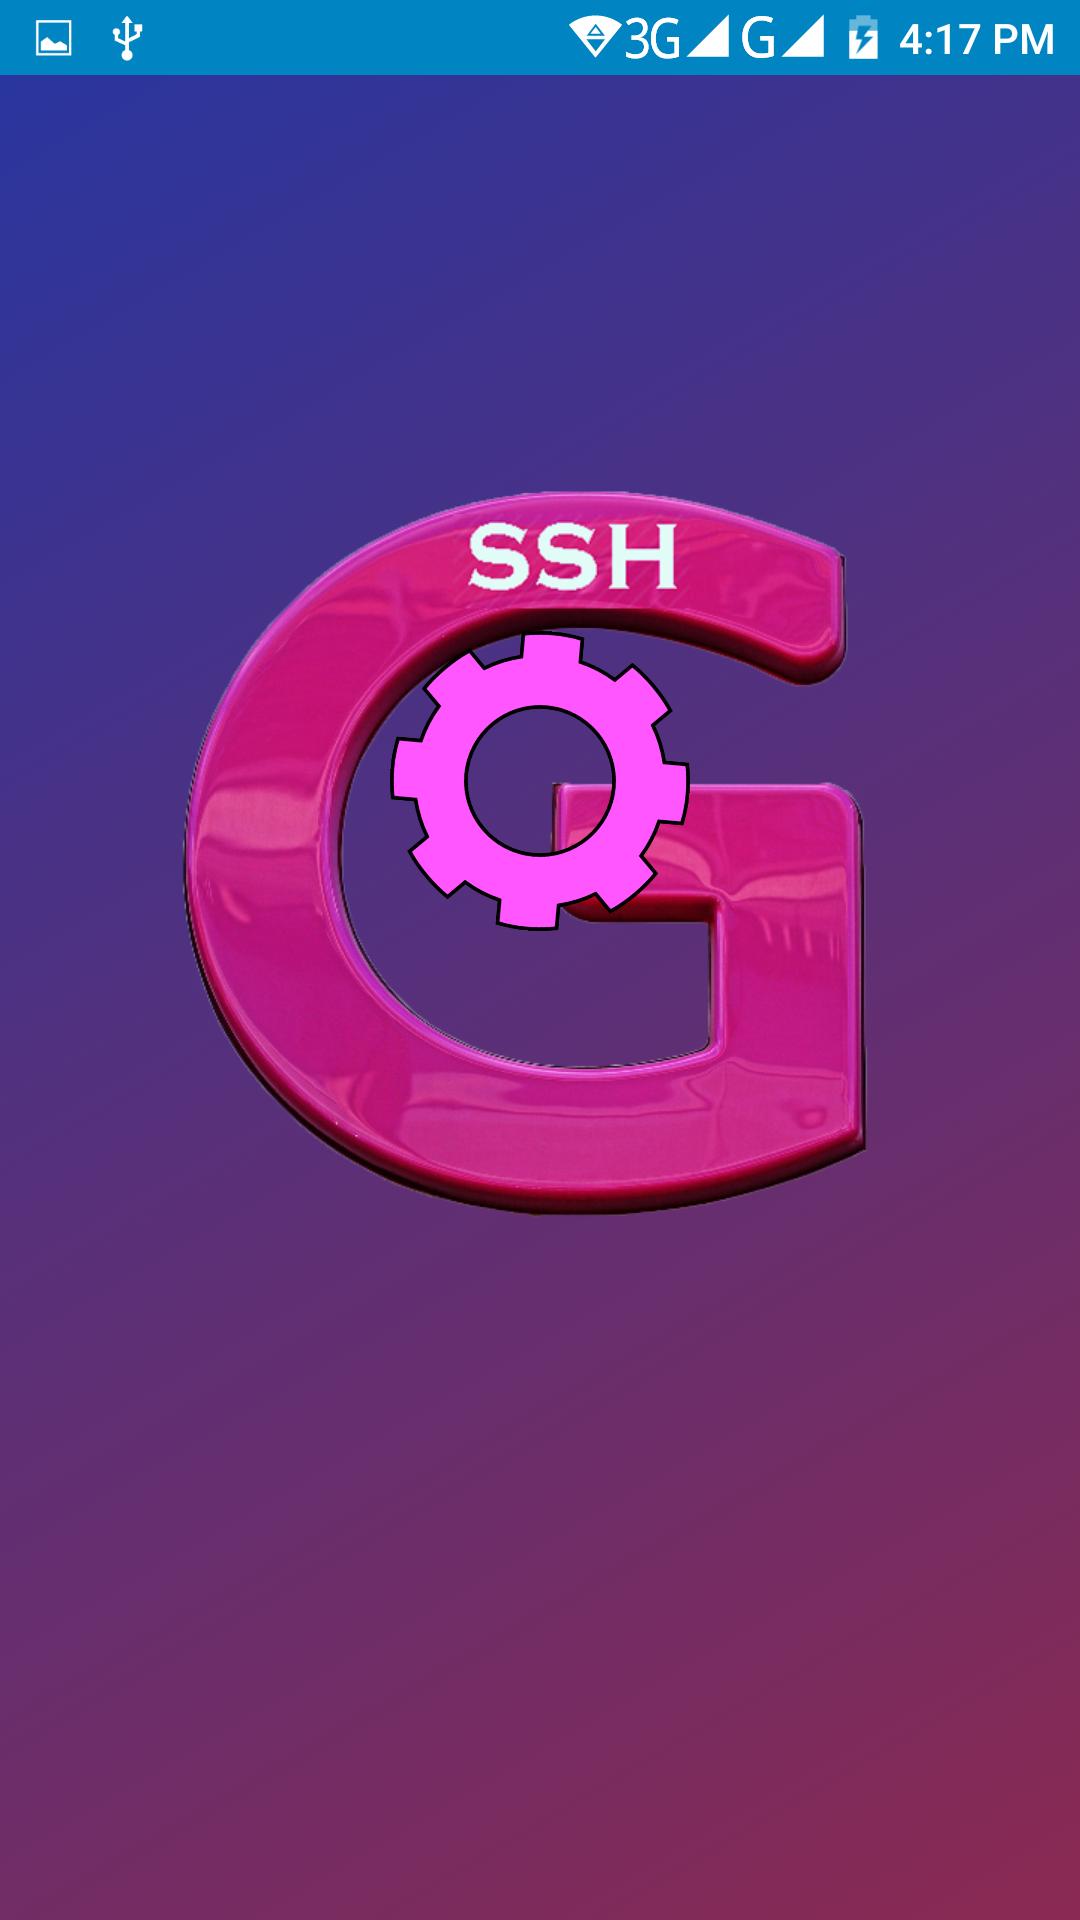 Ssh Account Generator For Android Apk Download - roblox account generator 2019 youtube download